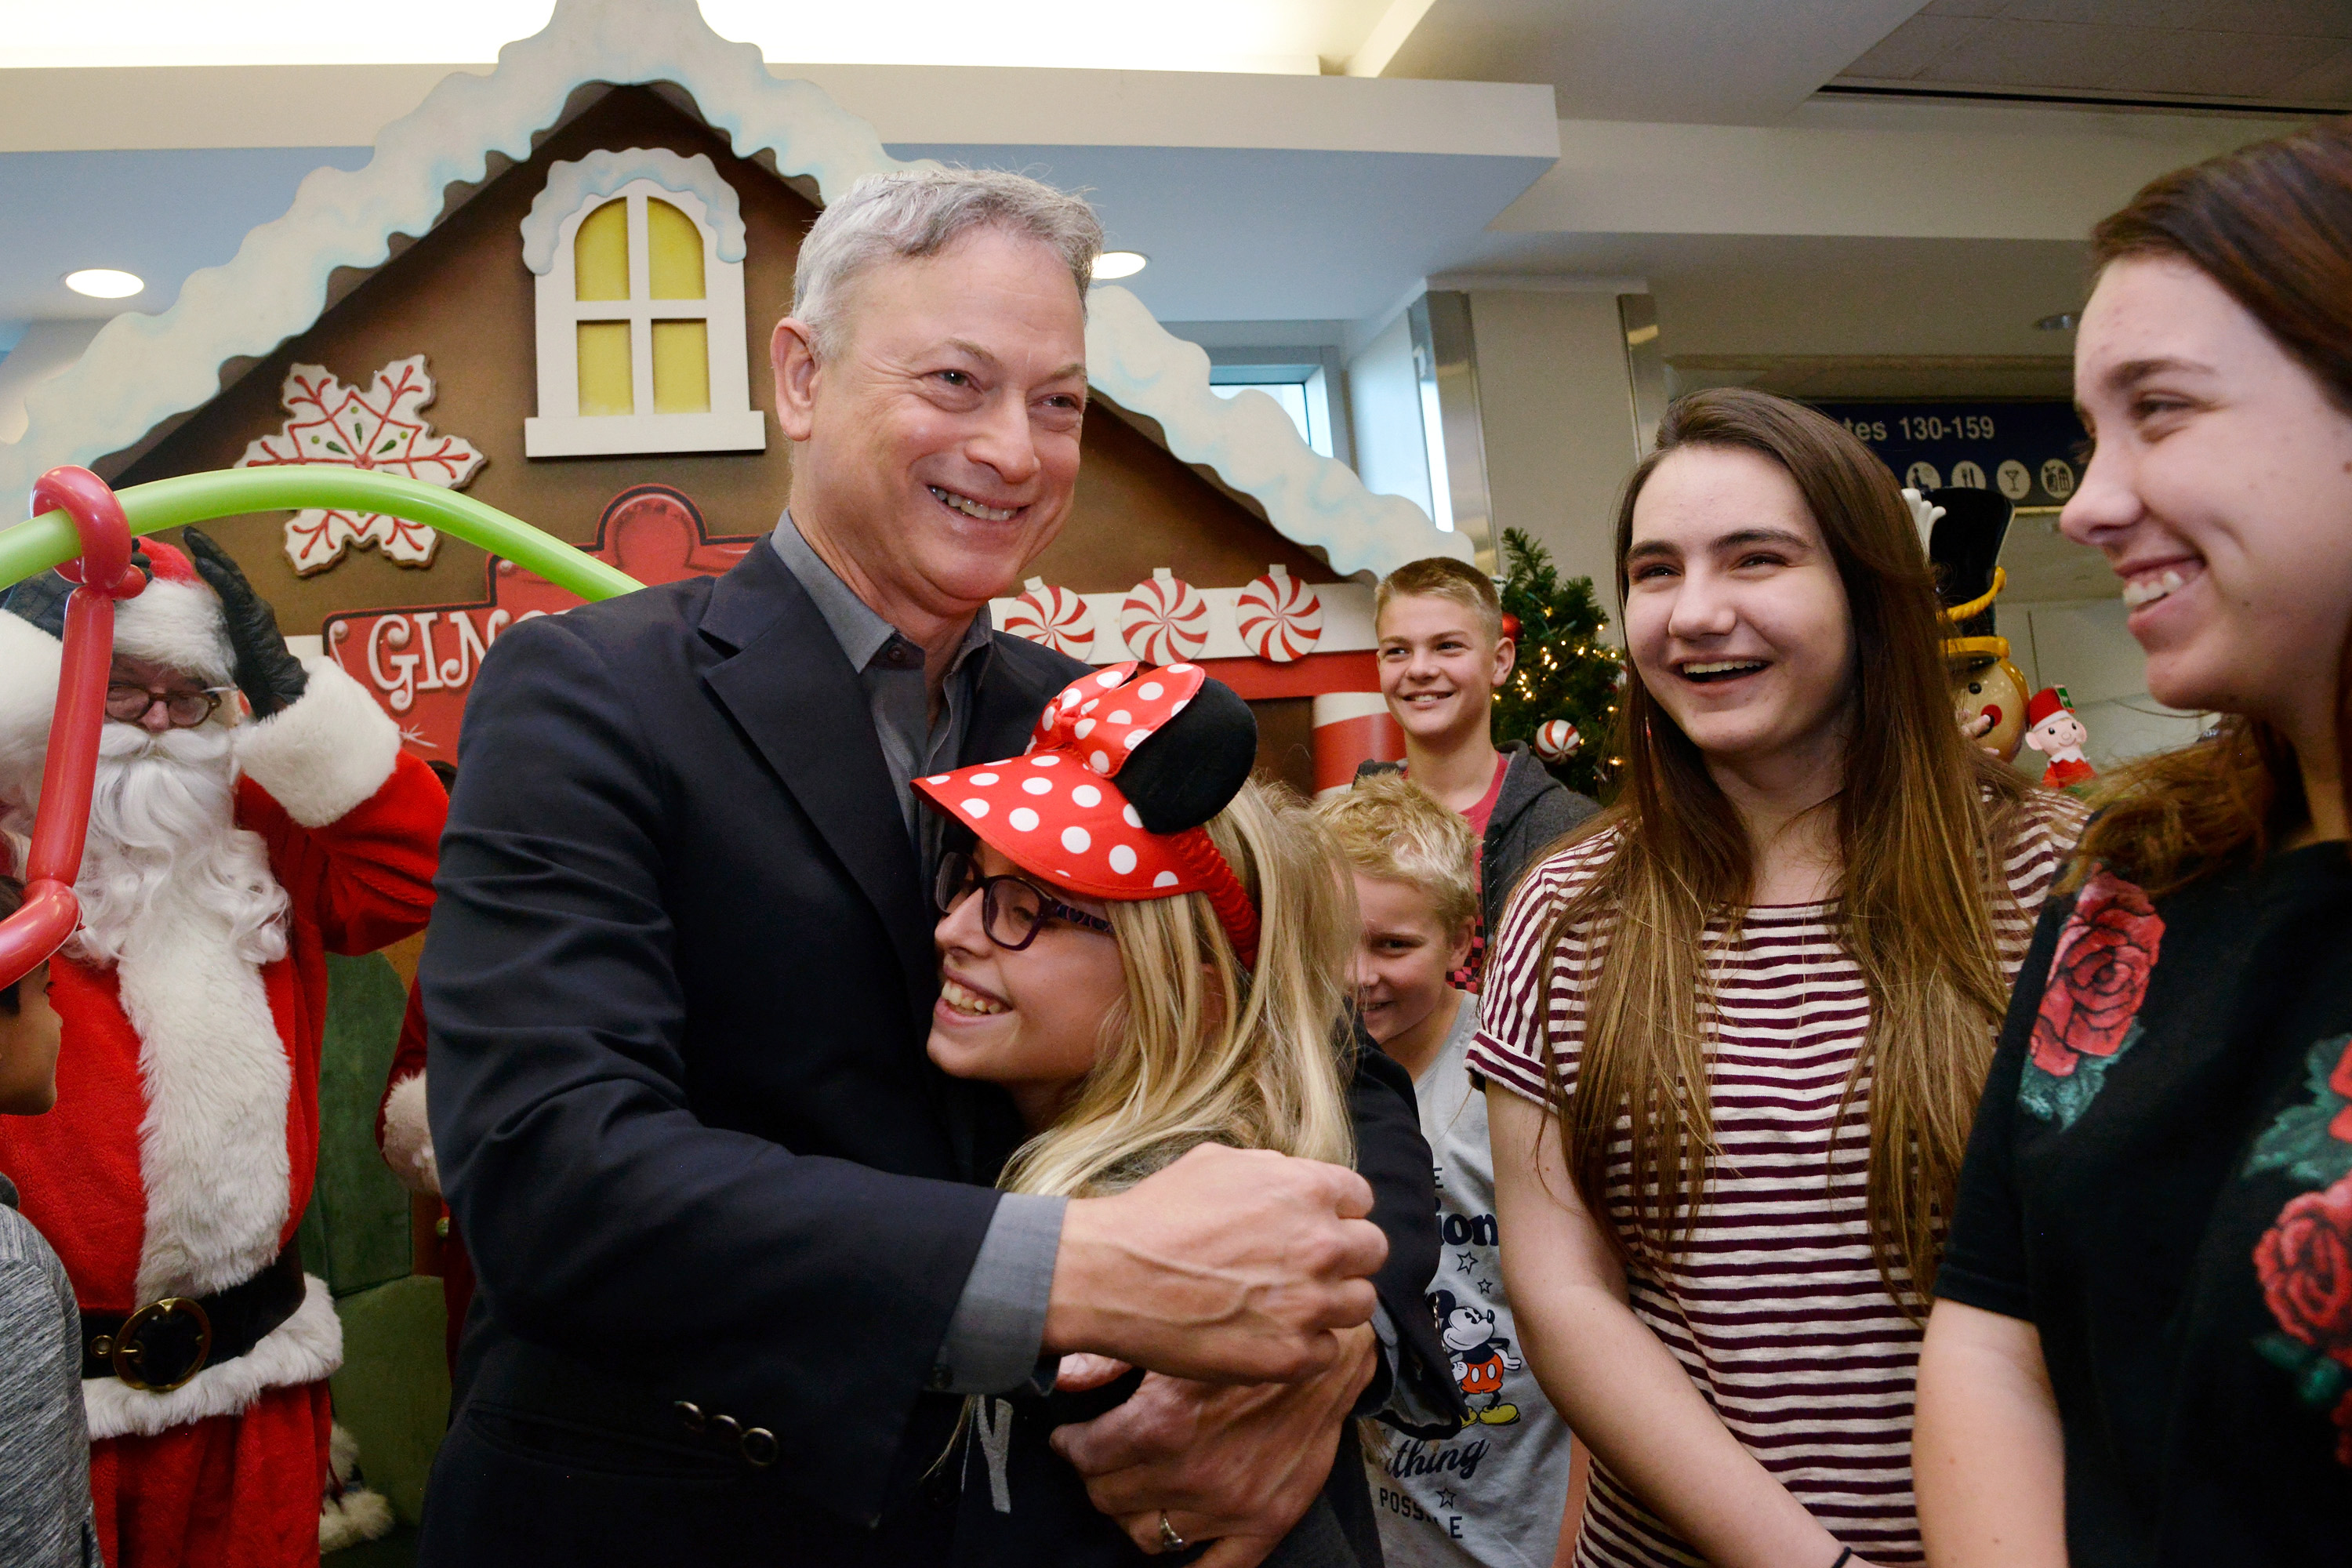 Gary Sinise meets with Gold Star families at the Gary Sinise Foundation's Snowball Express Send-Off Celebration in Los Angeles, California, on December 8, 2018. | Source: Getty Images